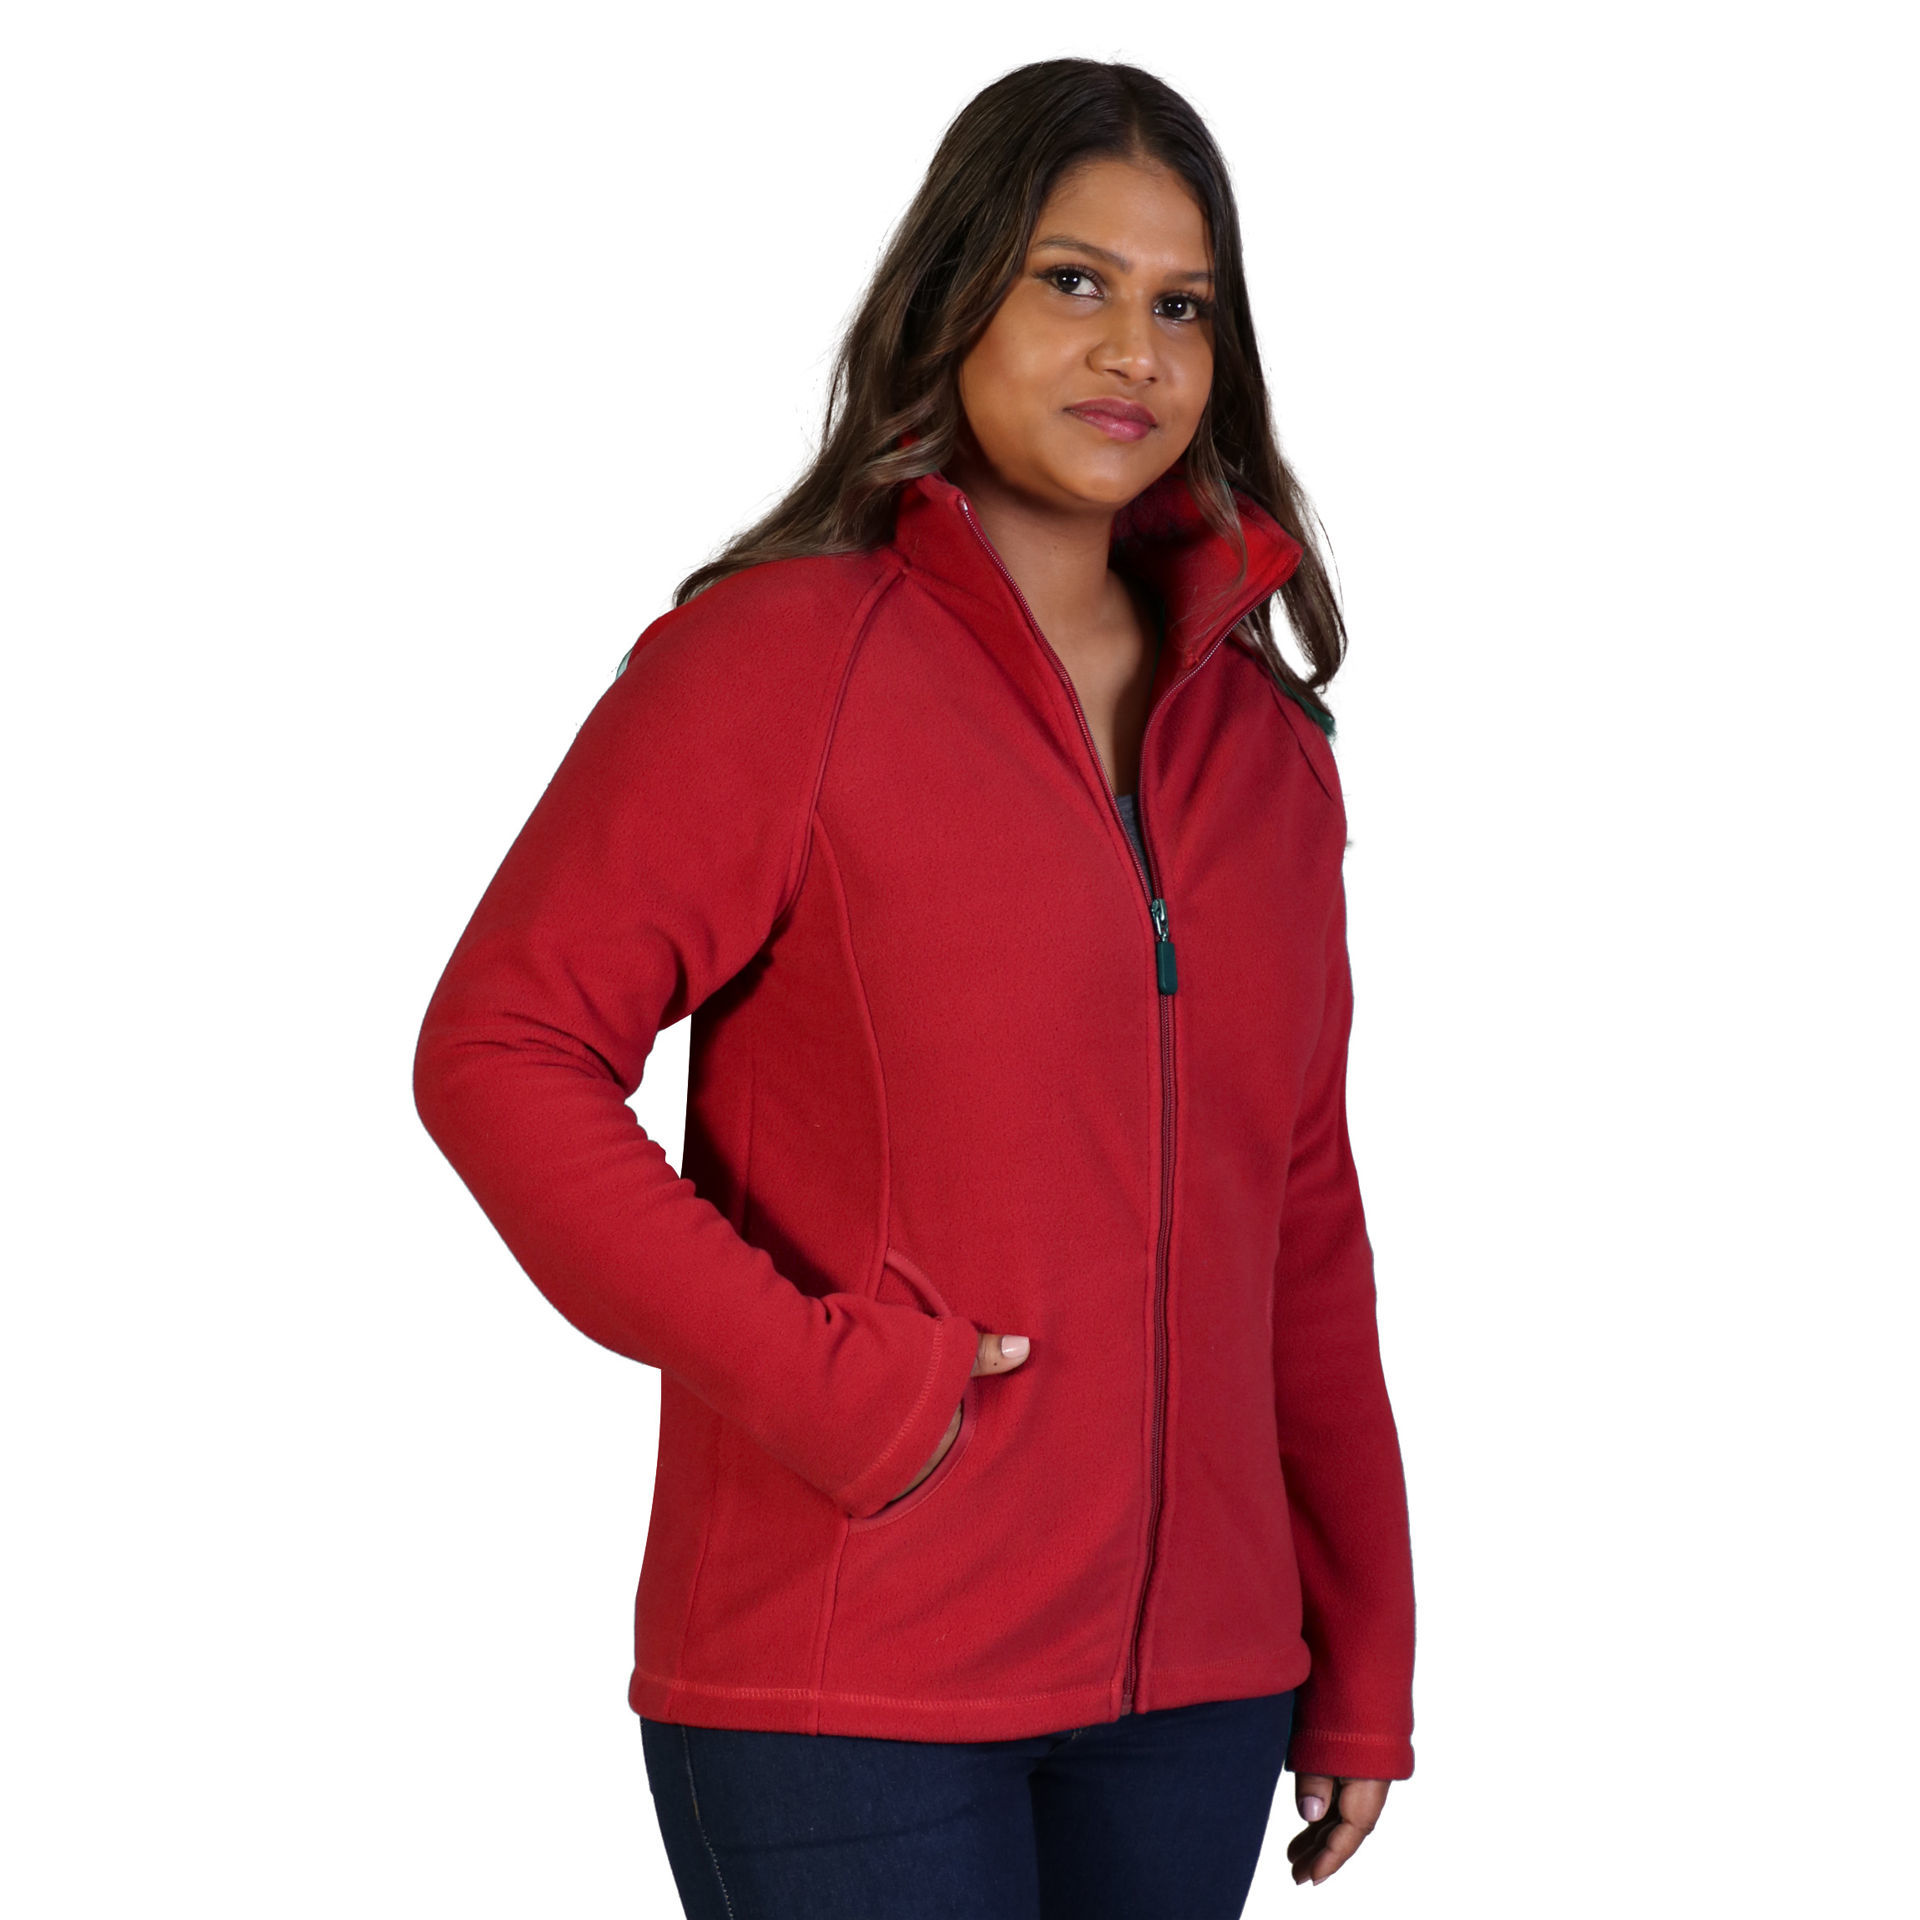 Global Citizen Inc. - Manufacturers and suppliers of promotional, corporate  and uniform apparel.. -Ladies Microfiber Polar Fleece